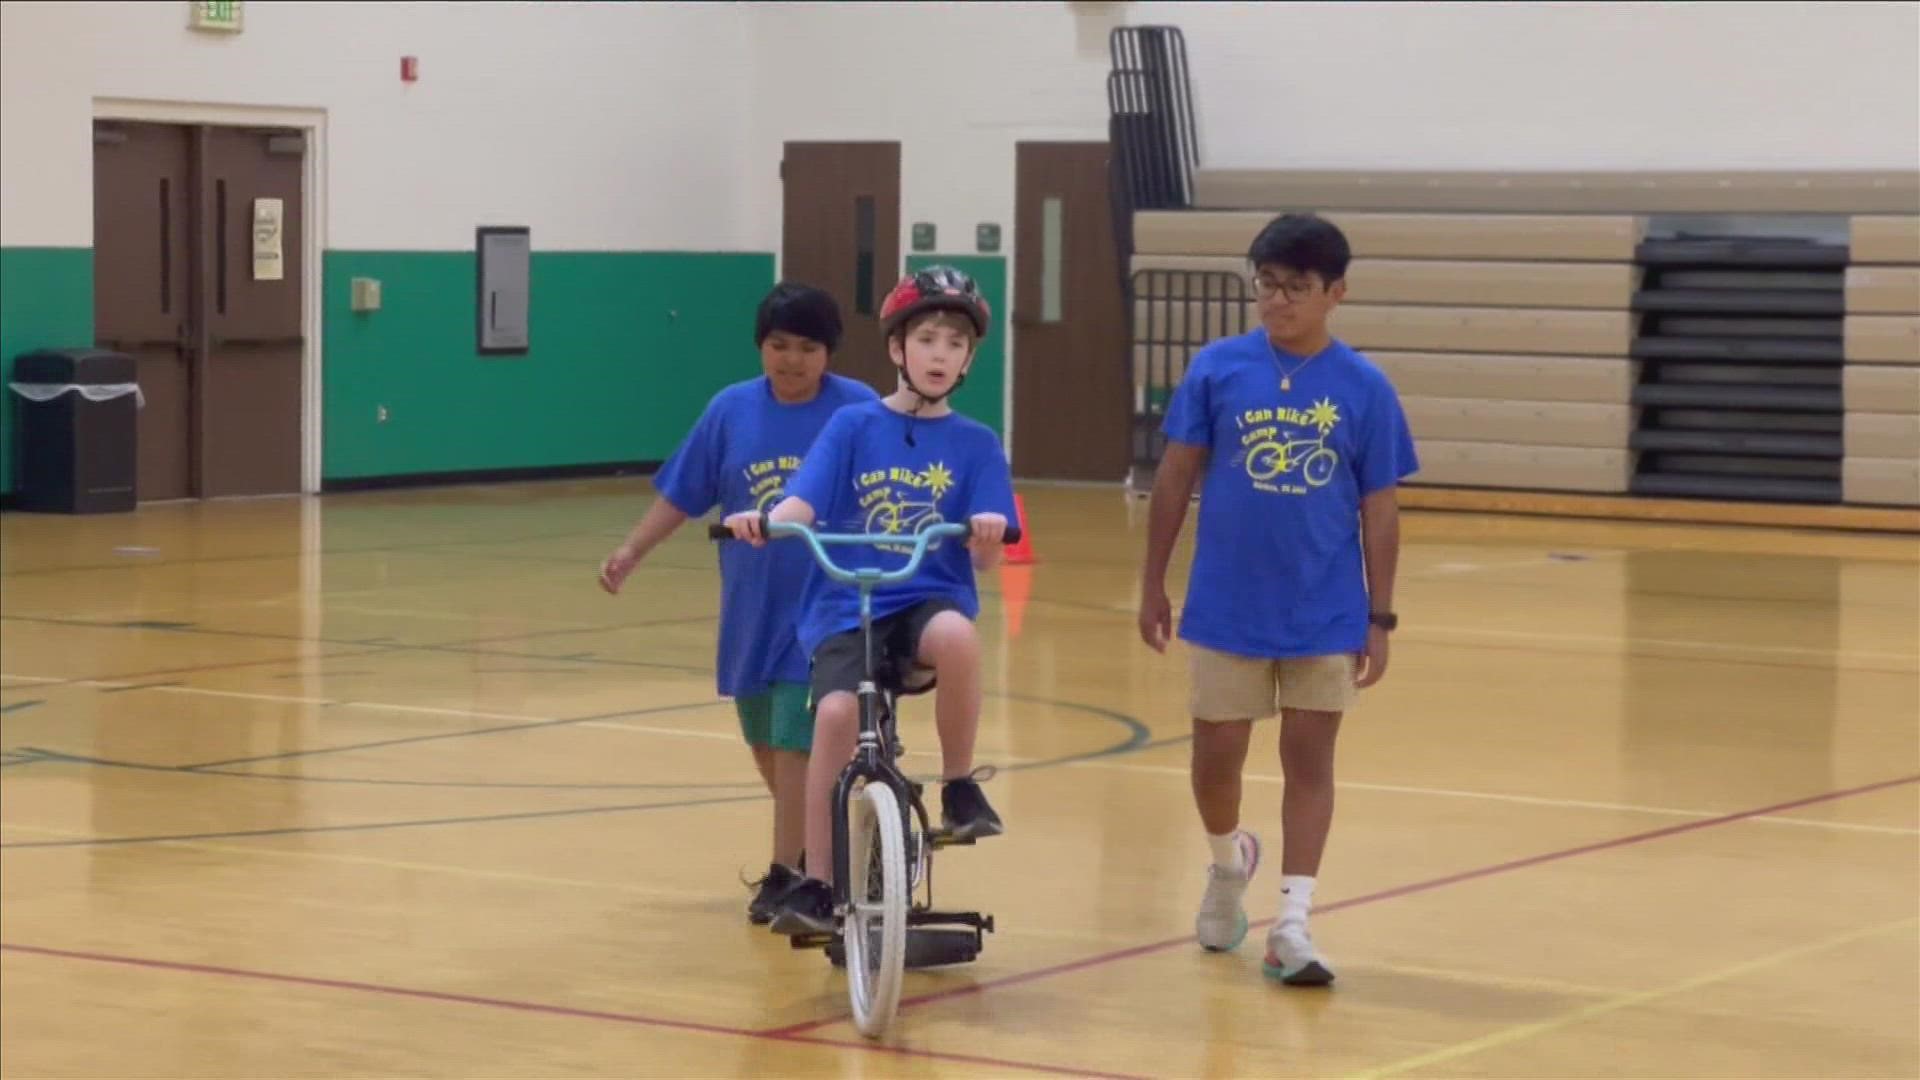 By the end of the week, the kids will be able to ride a two-wheel bike.